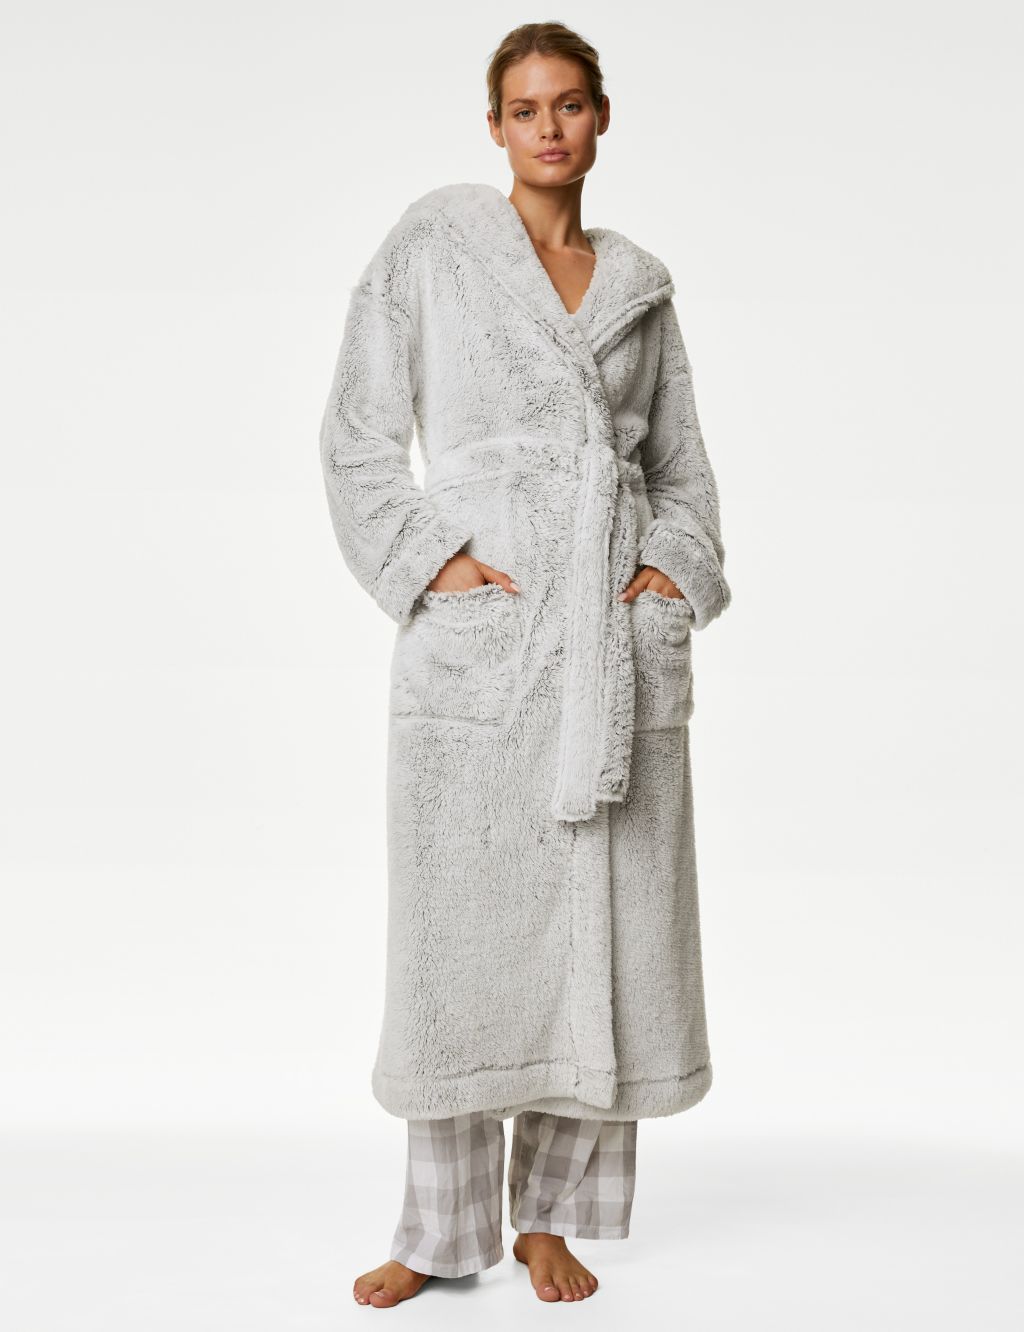 Fleece Hooded Dressing Gown image 6